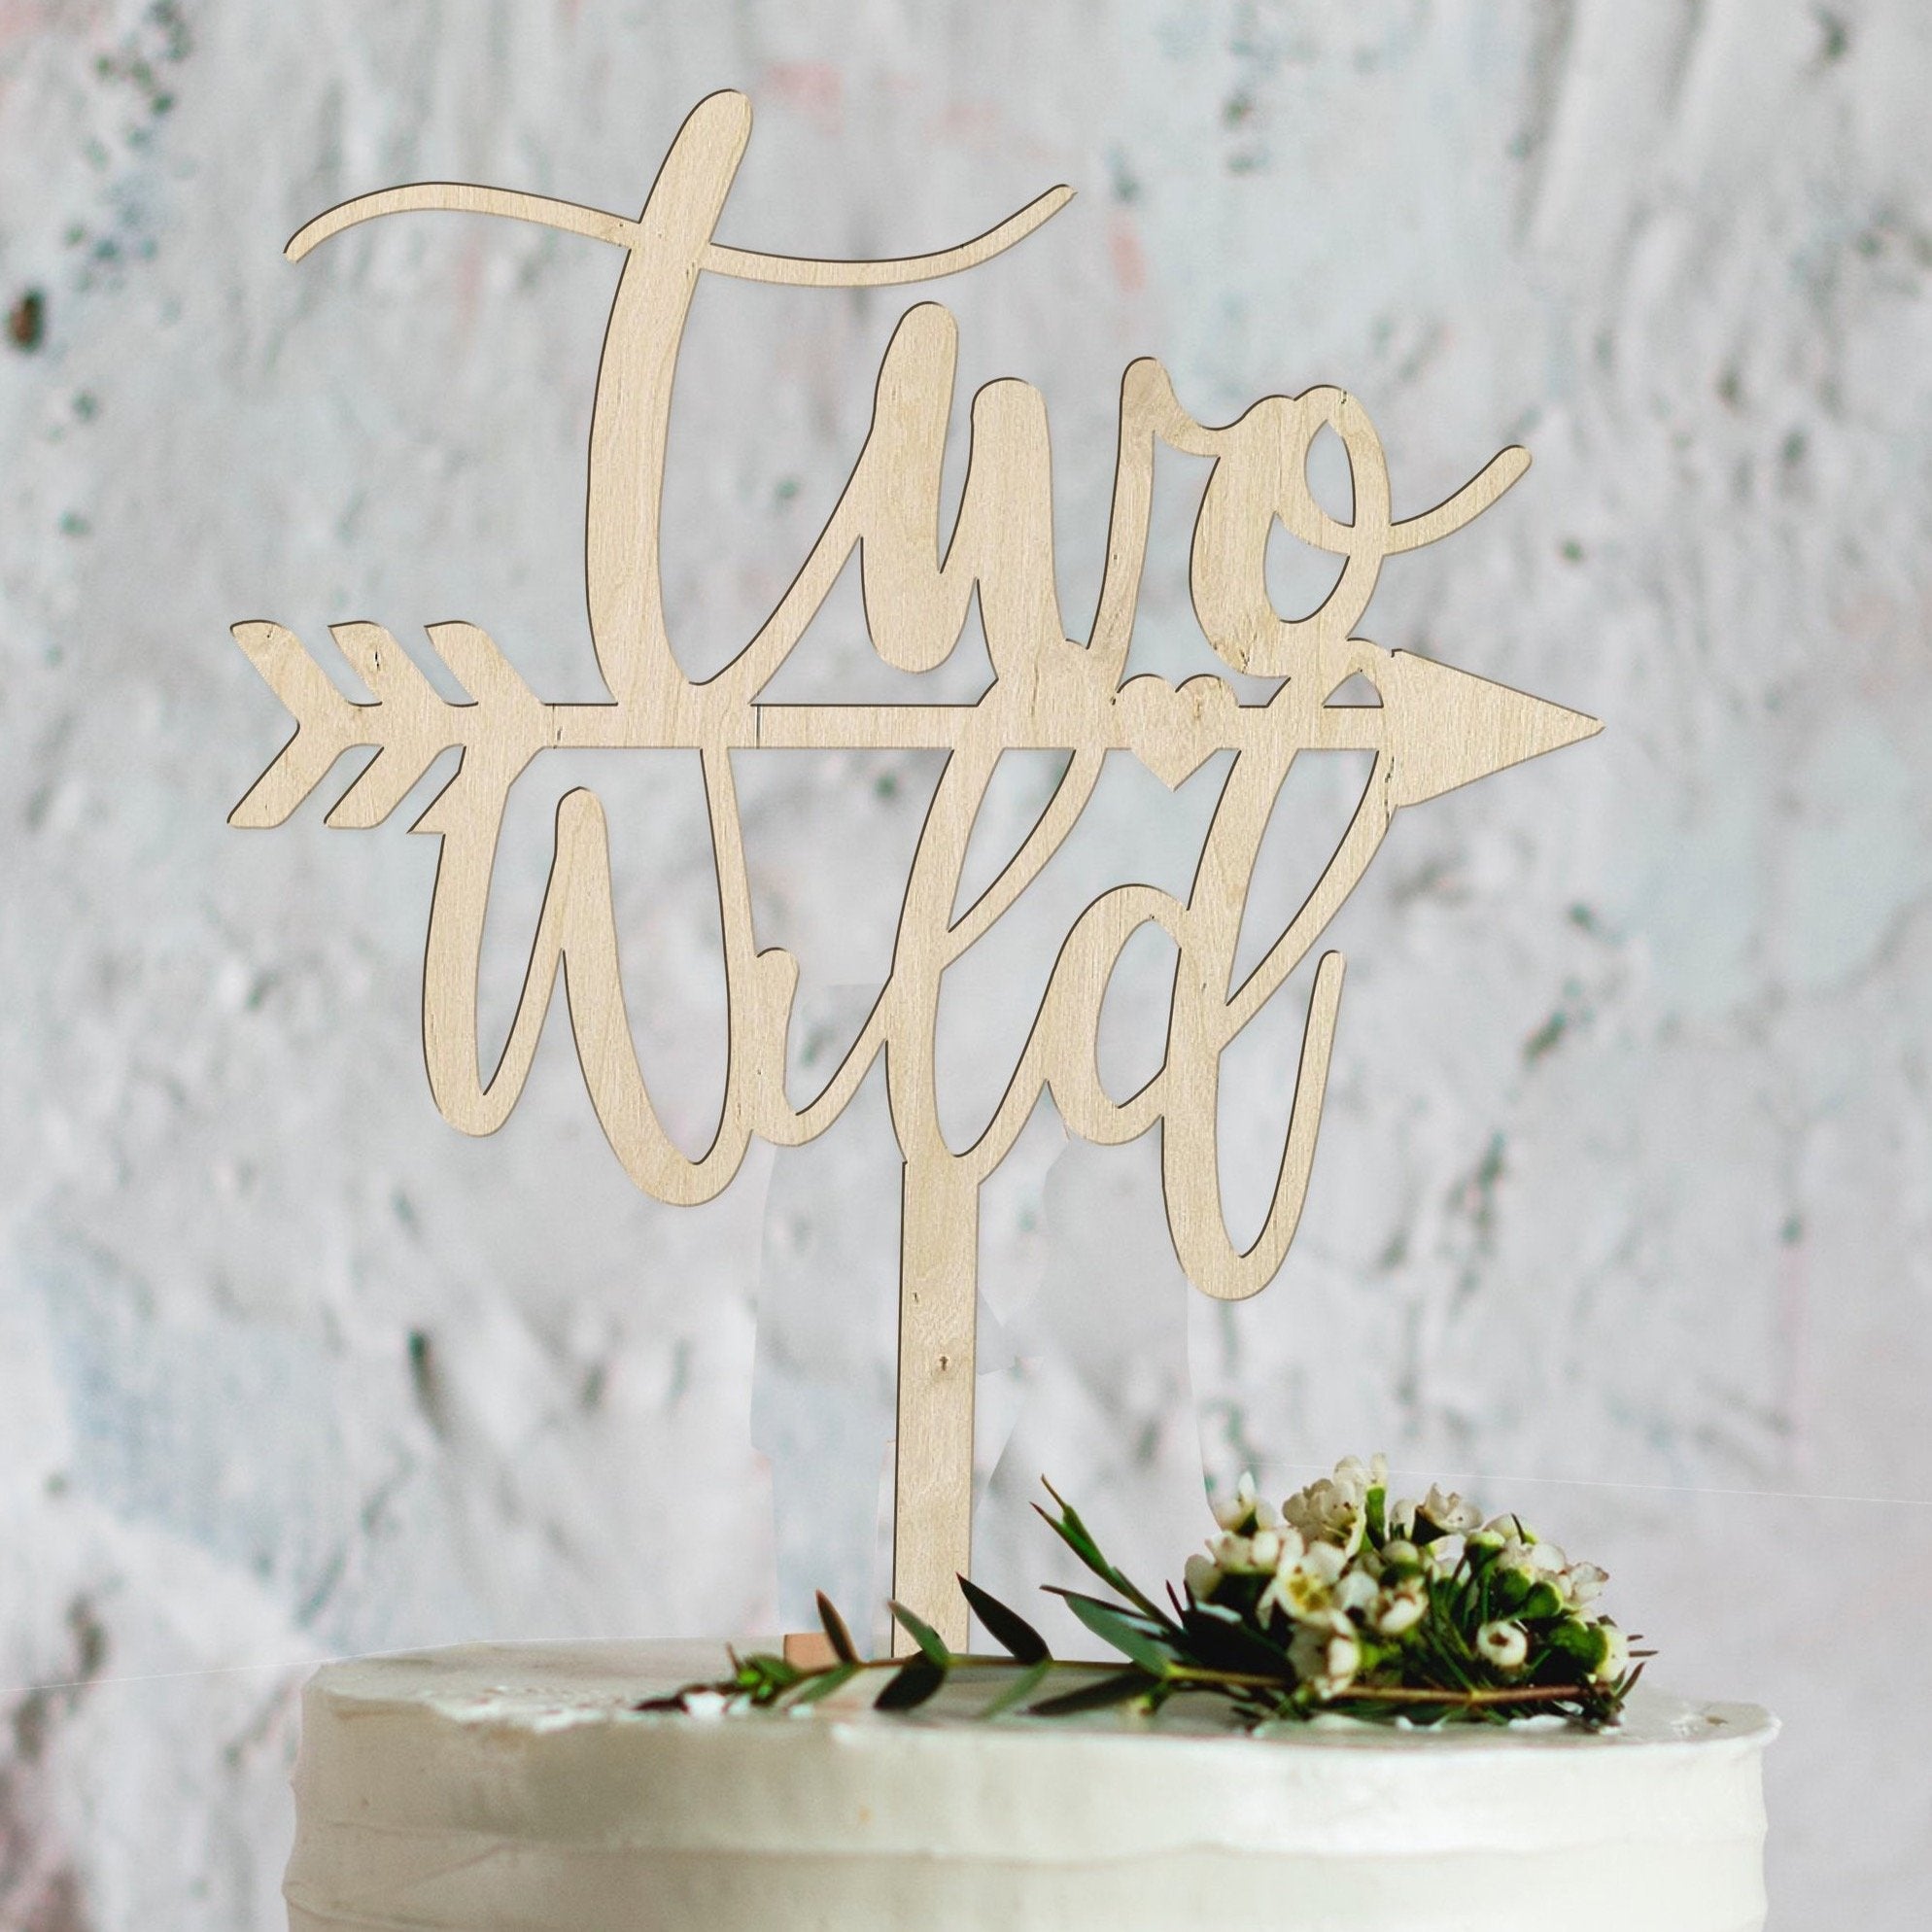 Two wild wooden birthday cake topper – Birch and Tides